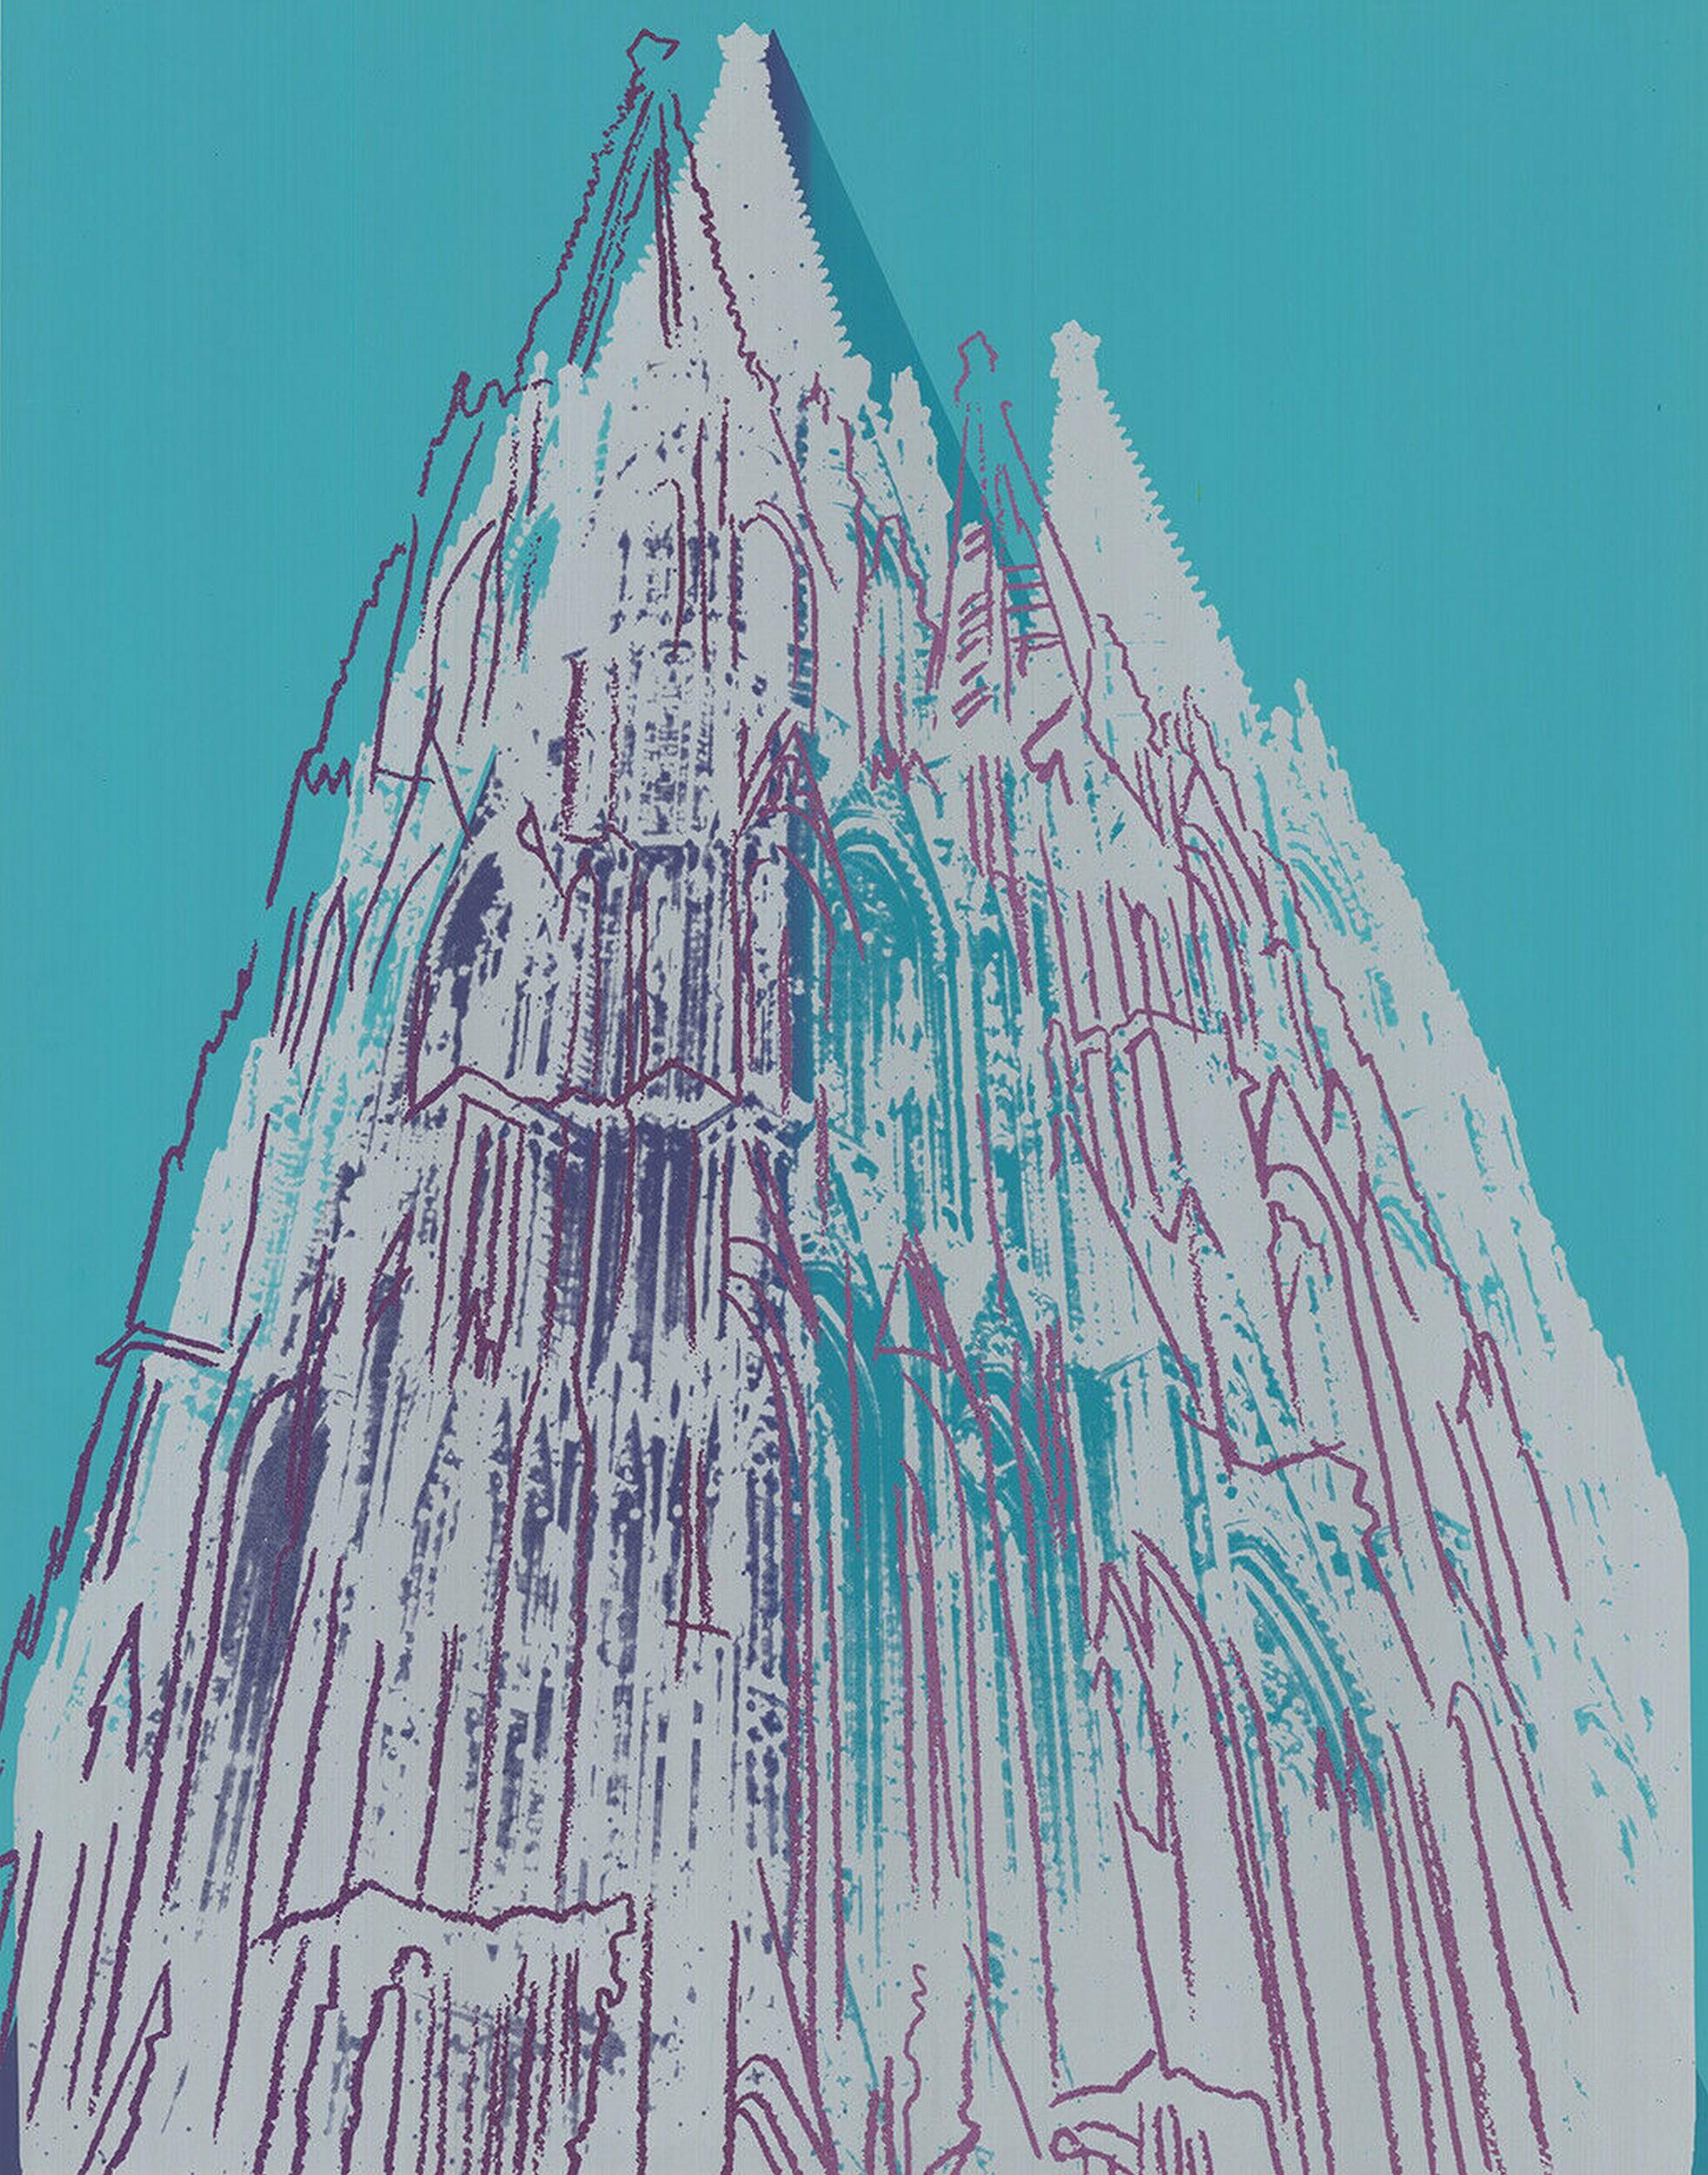 Jurgen Kuhl  Landscape Print - Cologne Cathedral (Teal) (Pop Art, Andy Warhol) $45 SHIPPING US ONLY (NOT $349)